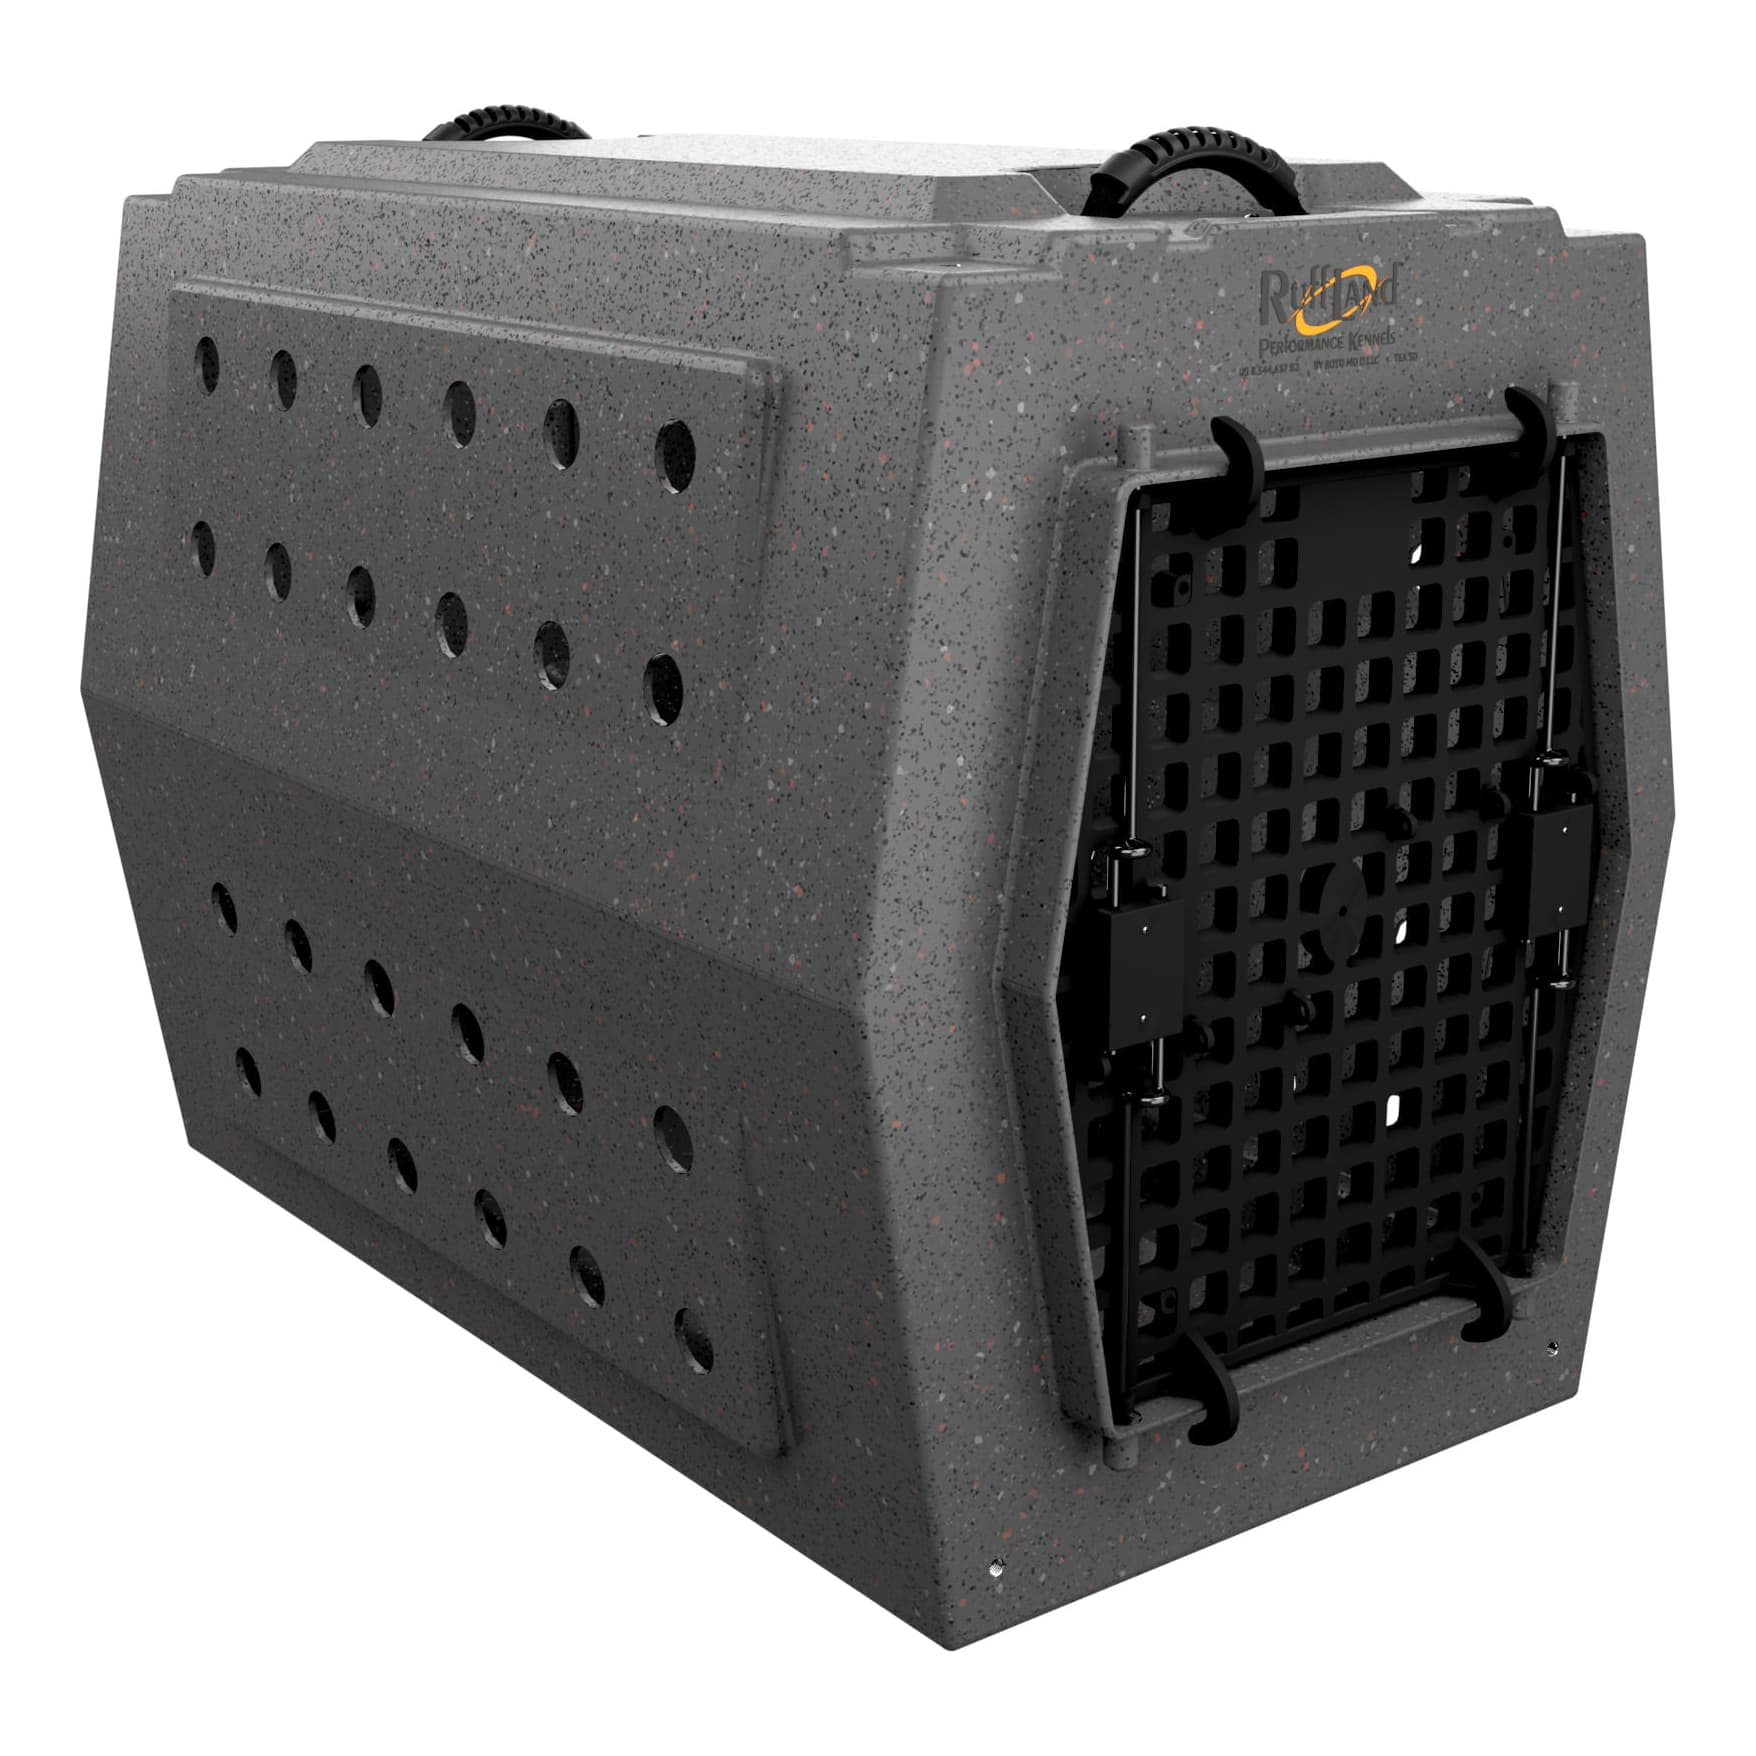 RuffLand Performance Kennels - Large